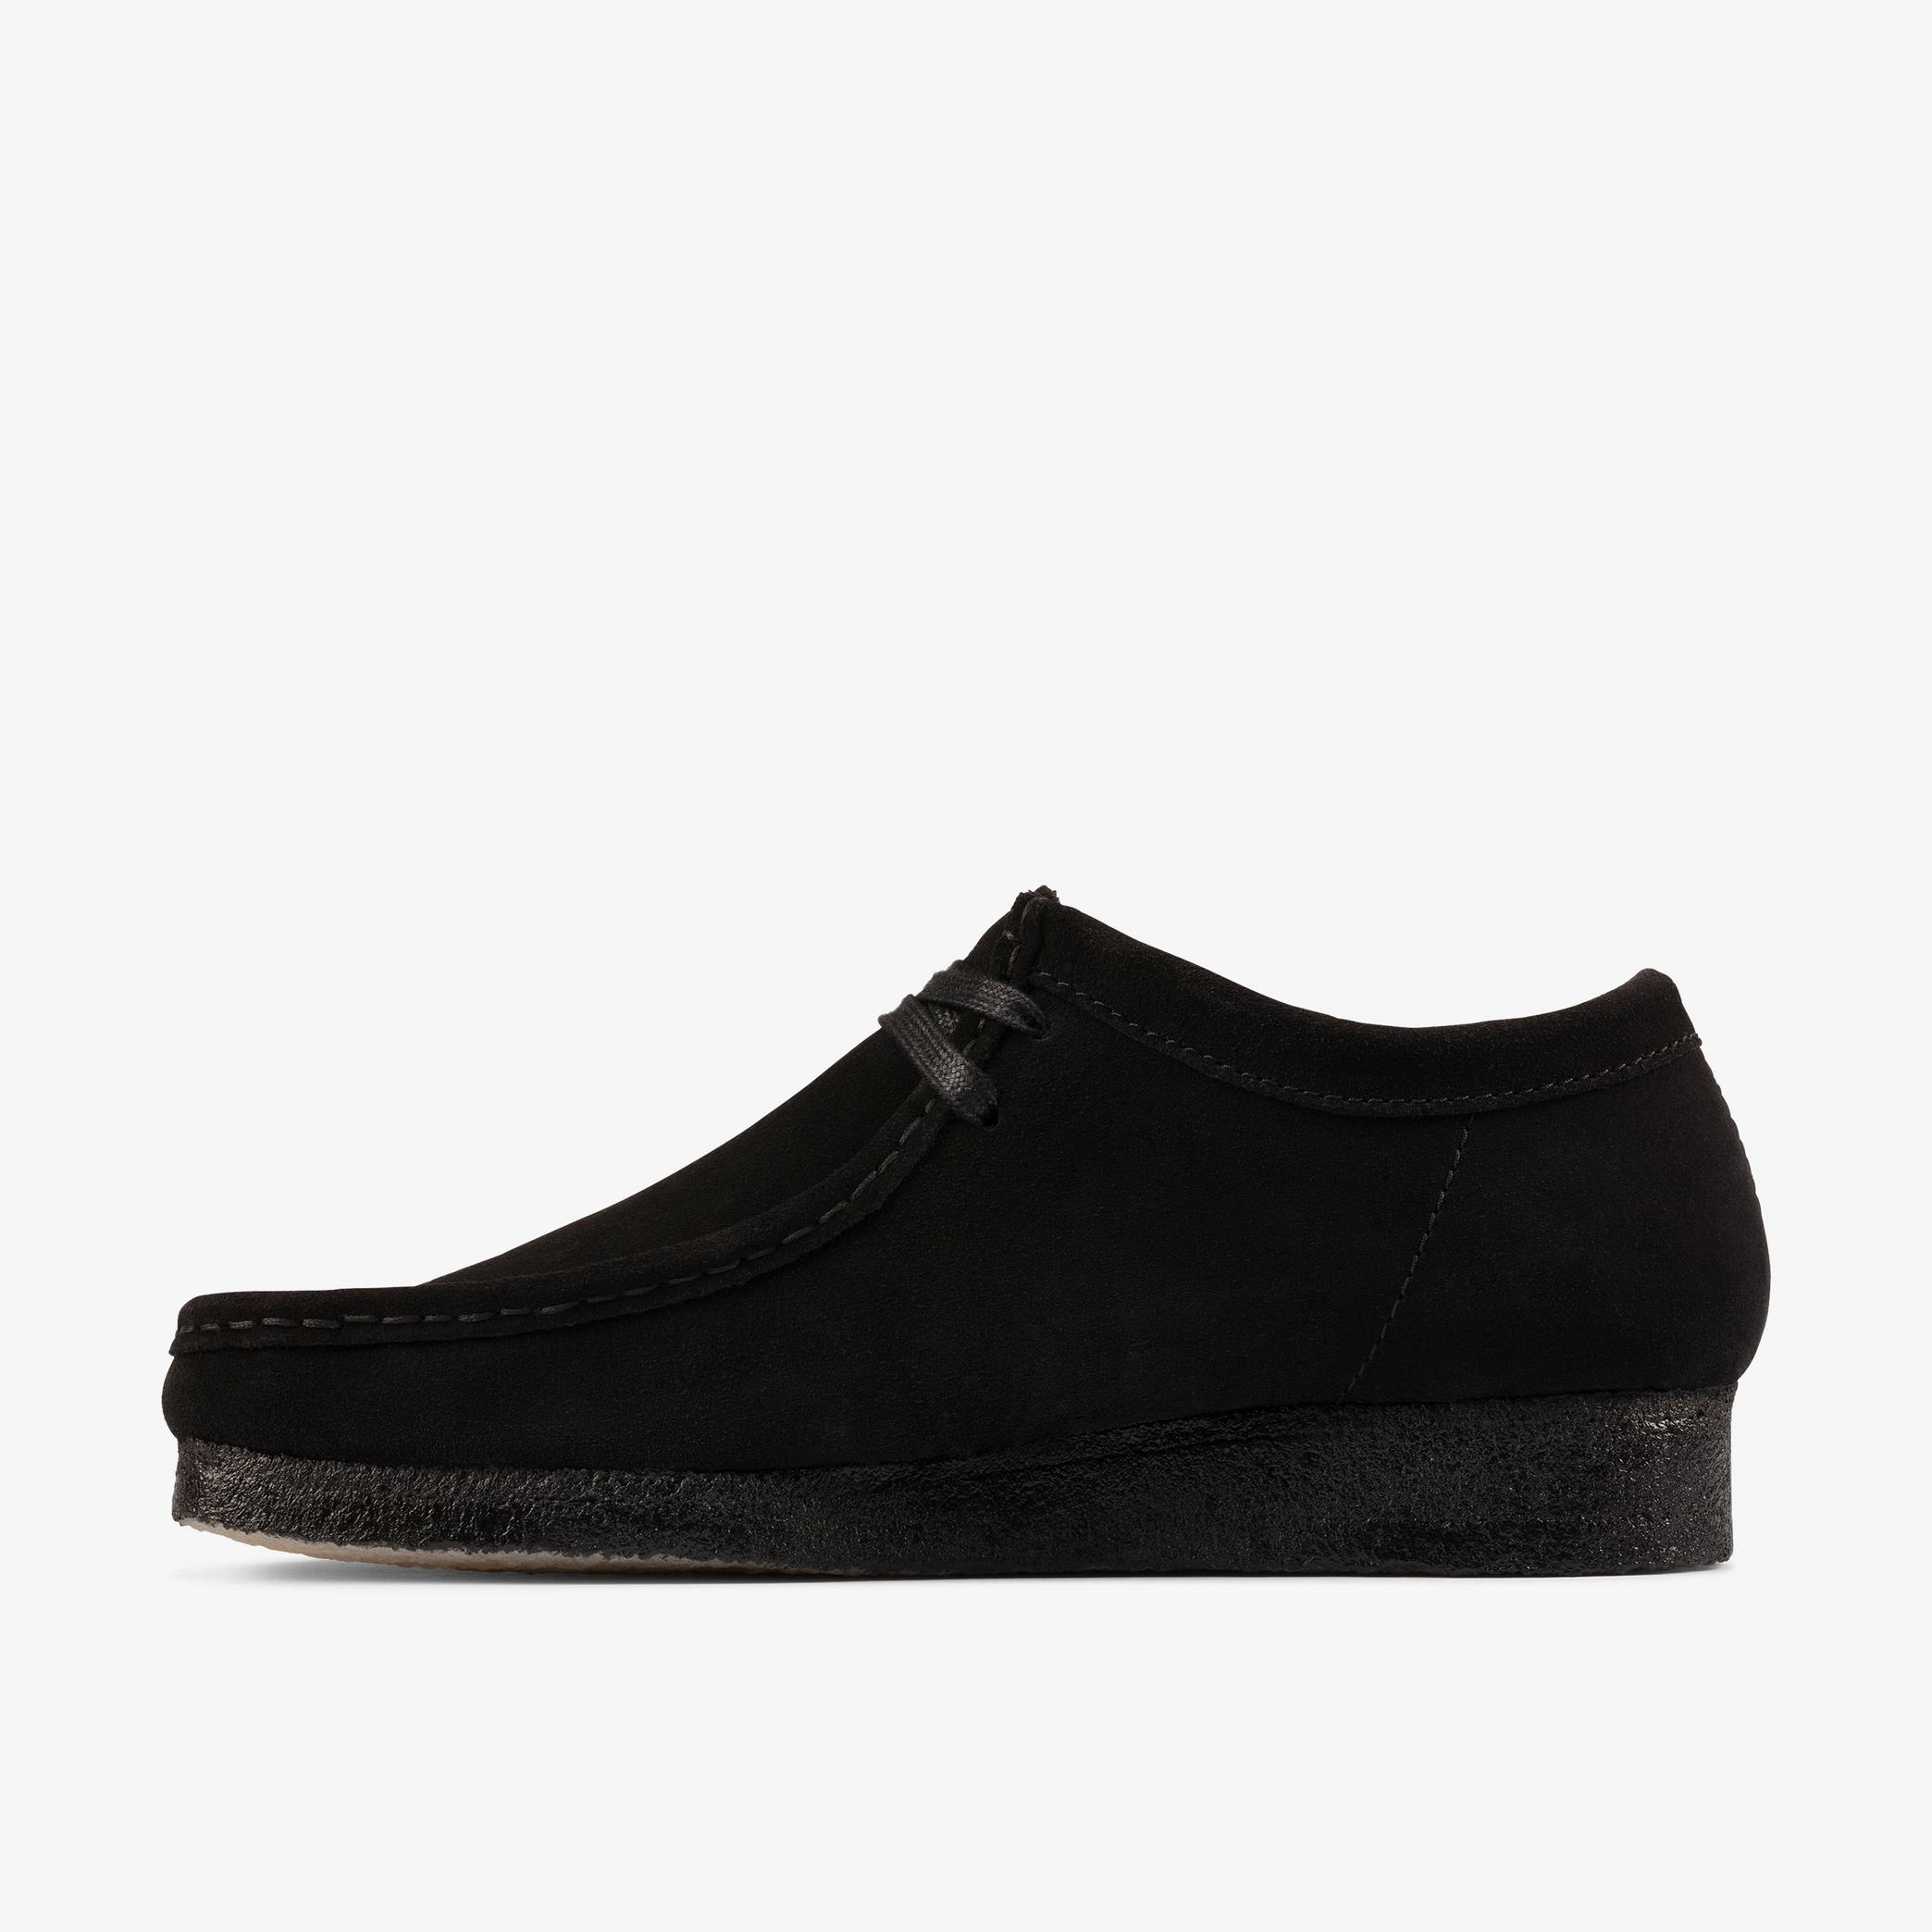 Wallabee Black Suede Shoes, view 2 of 6